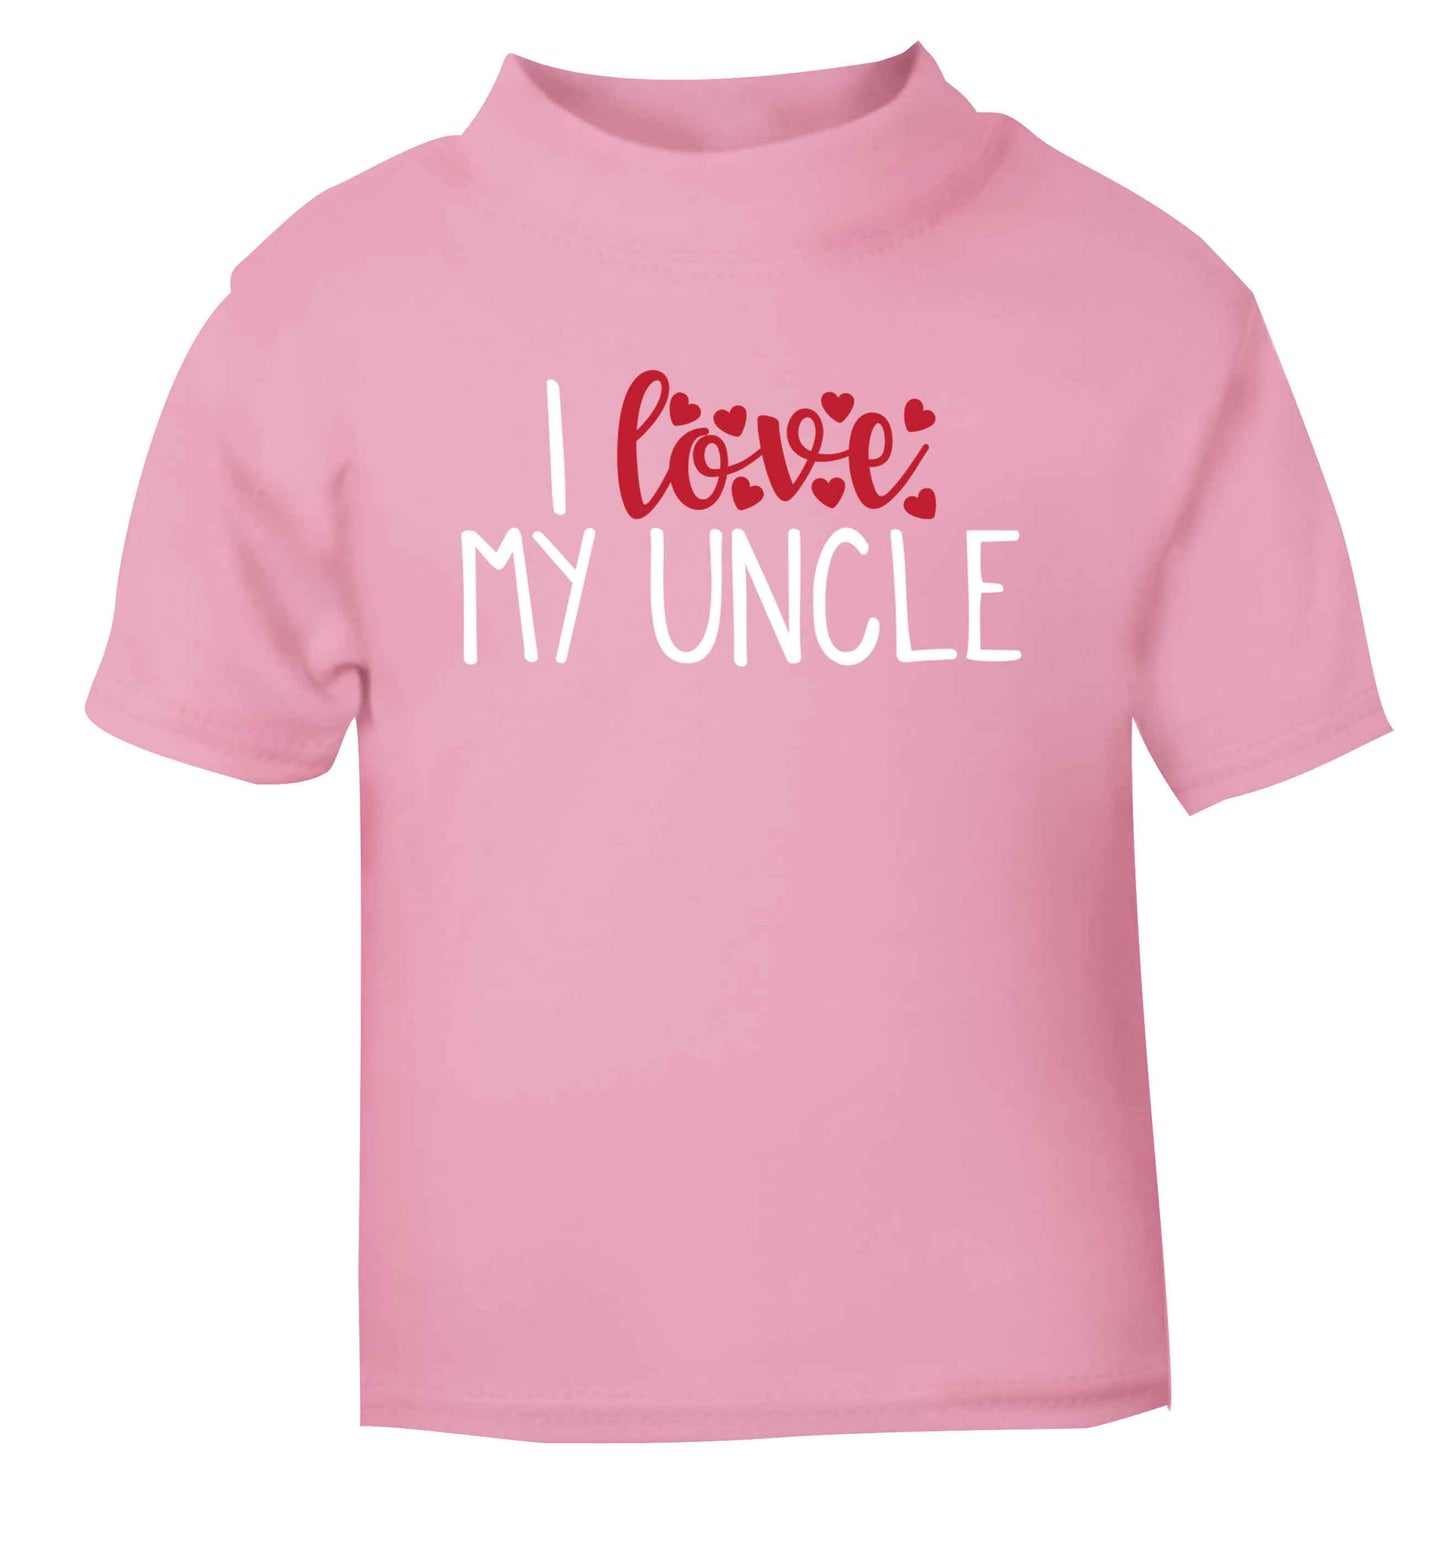 I love my uncle light pink Baby Toddler Tshirt 2 Years